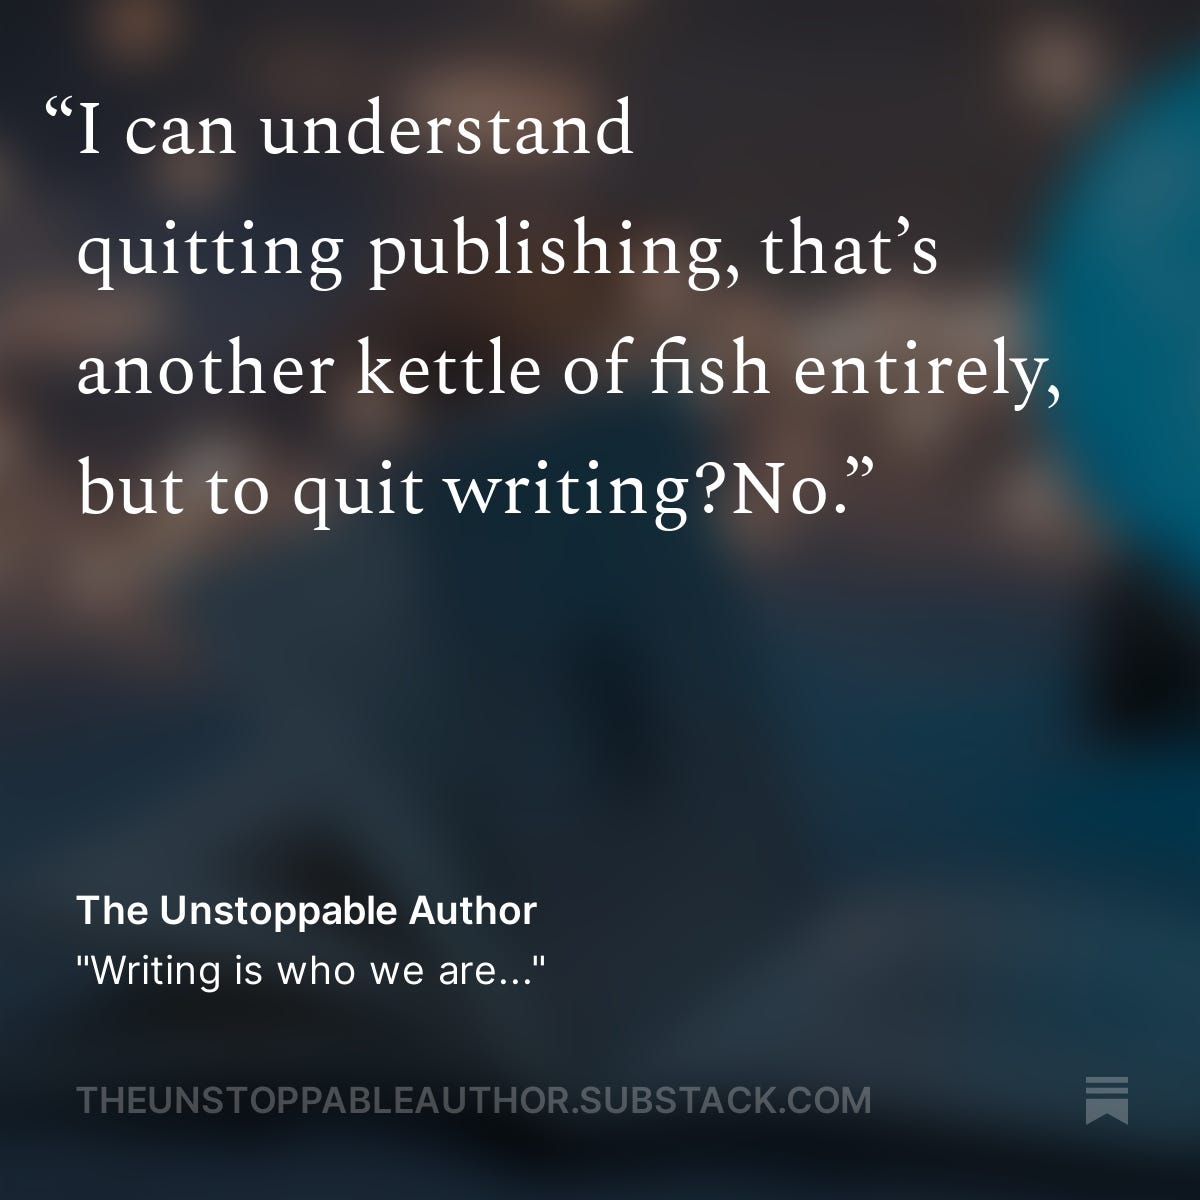 blurred background image with a snippet from my guest post: I can understand quitting publishing, that's another kettle of fish entirely, but to quit writing? No."